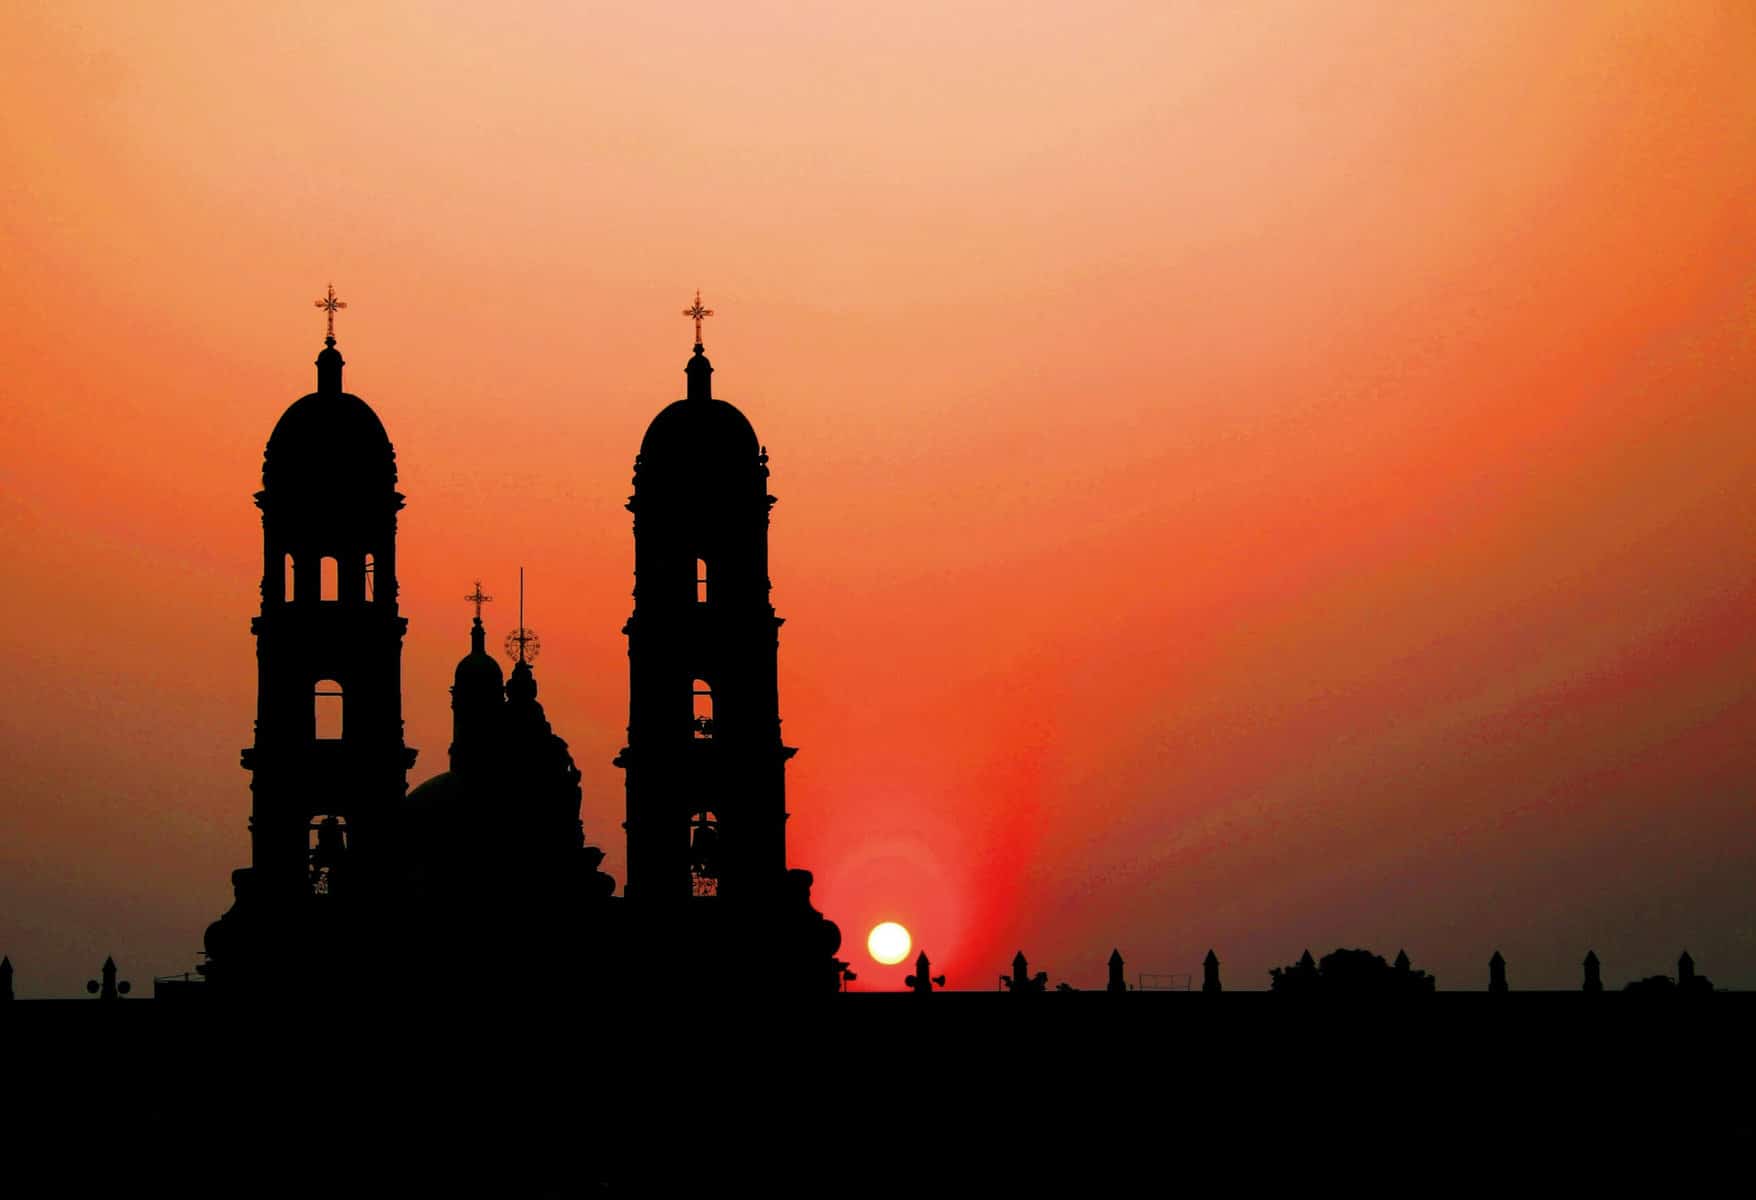 Basilica Zapopan in Jalisco, Mexico at sunset